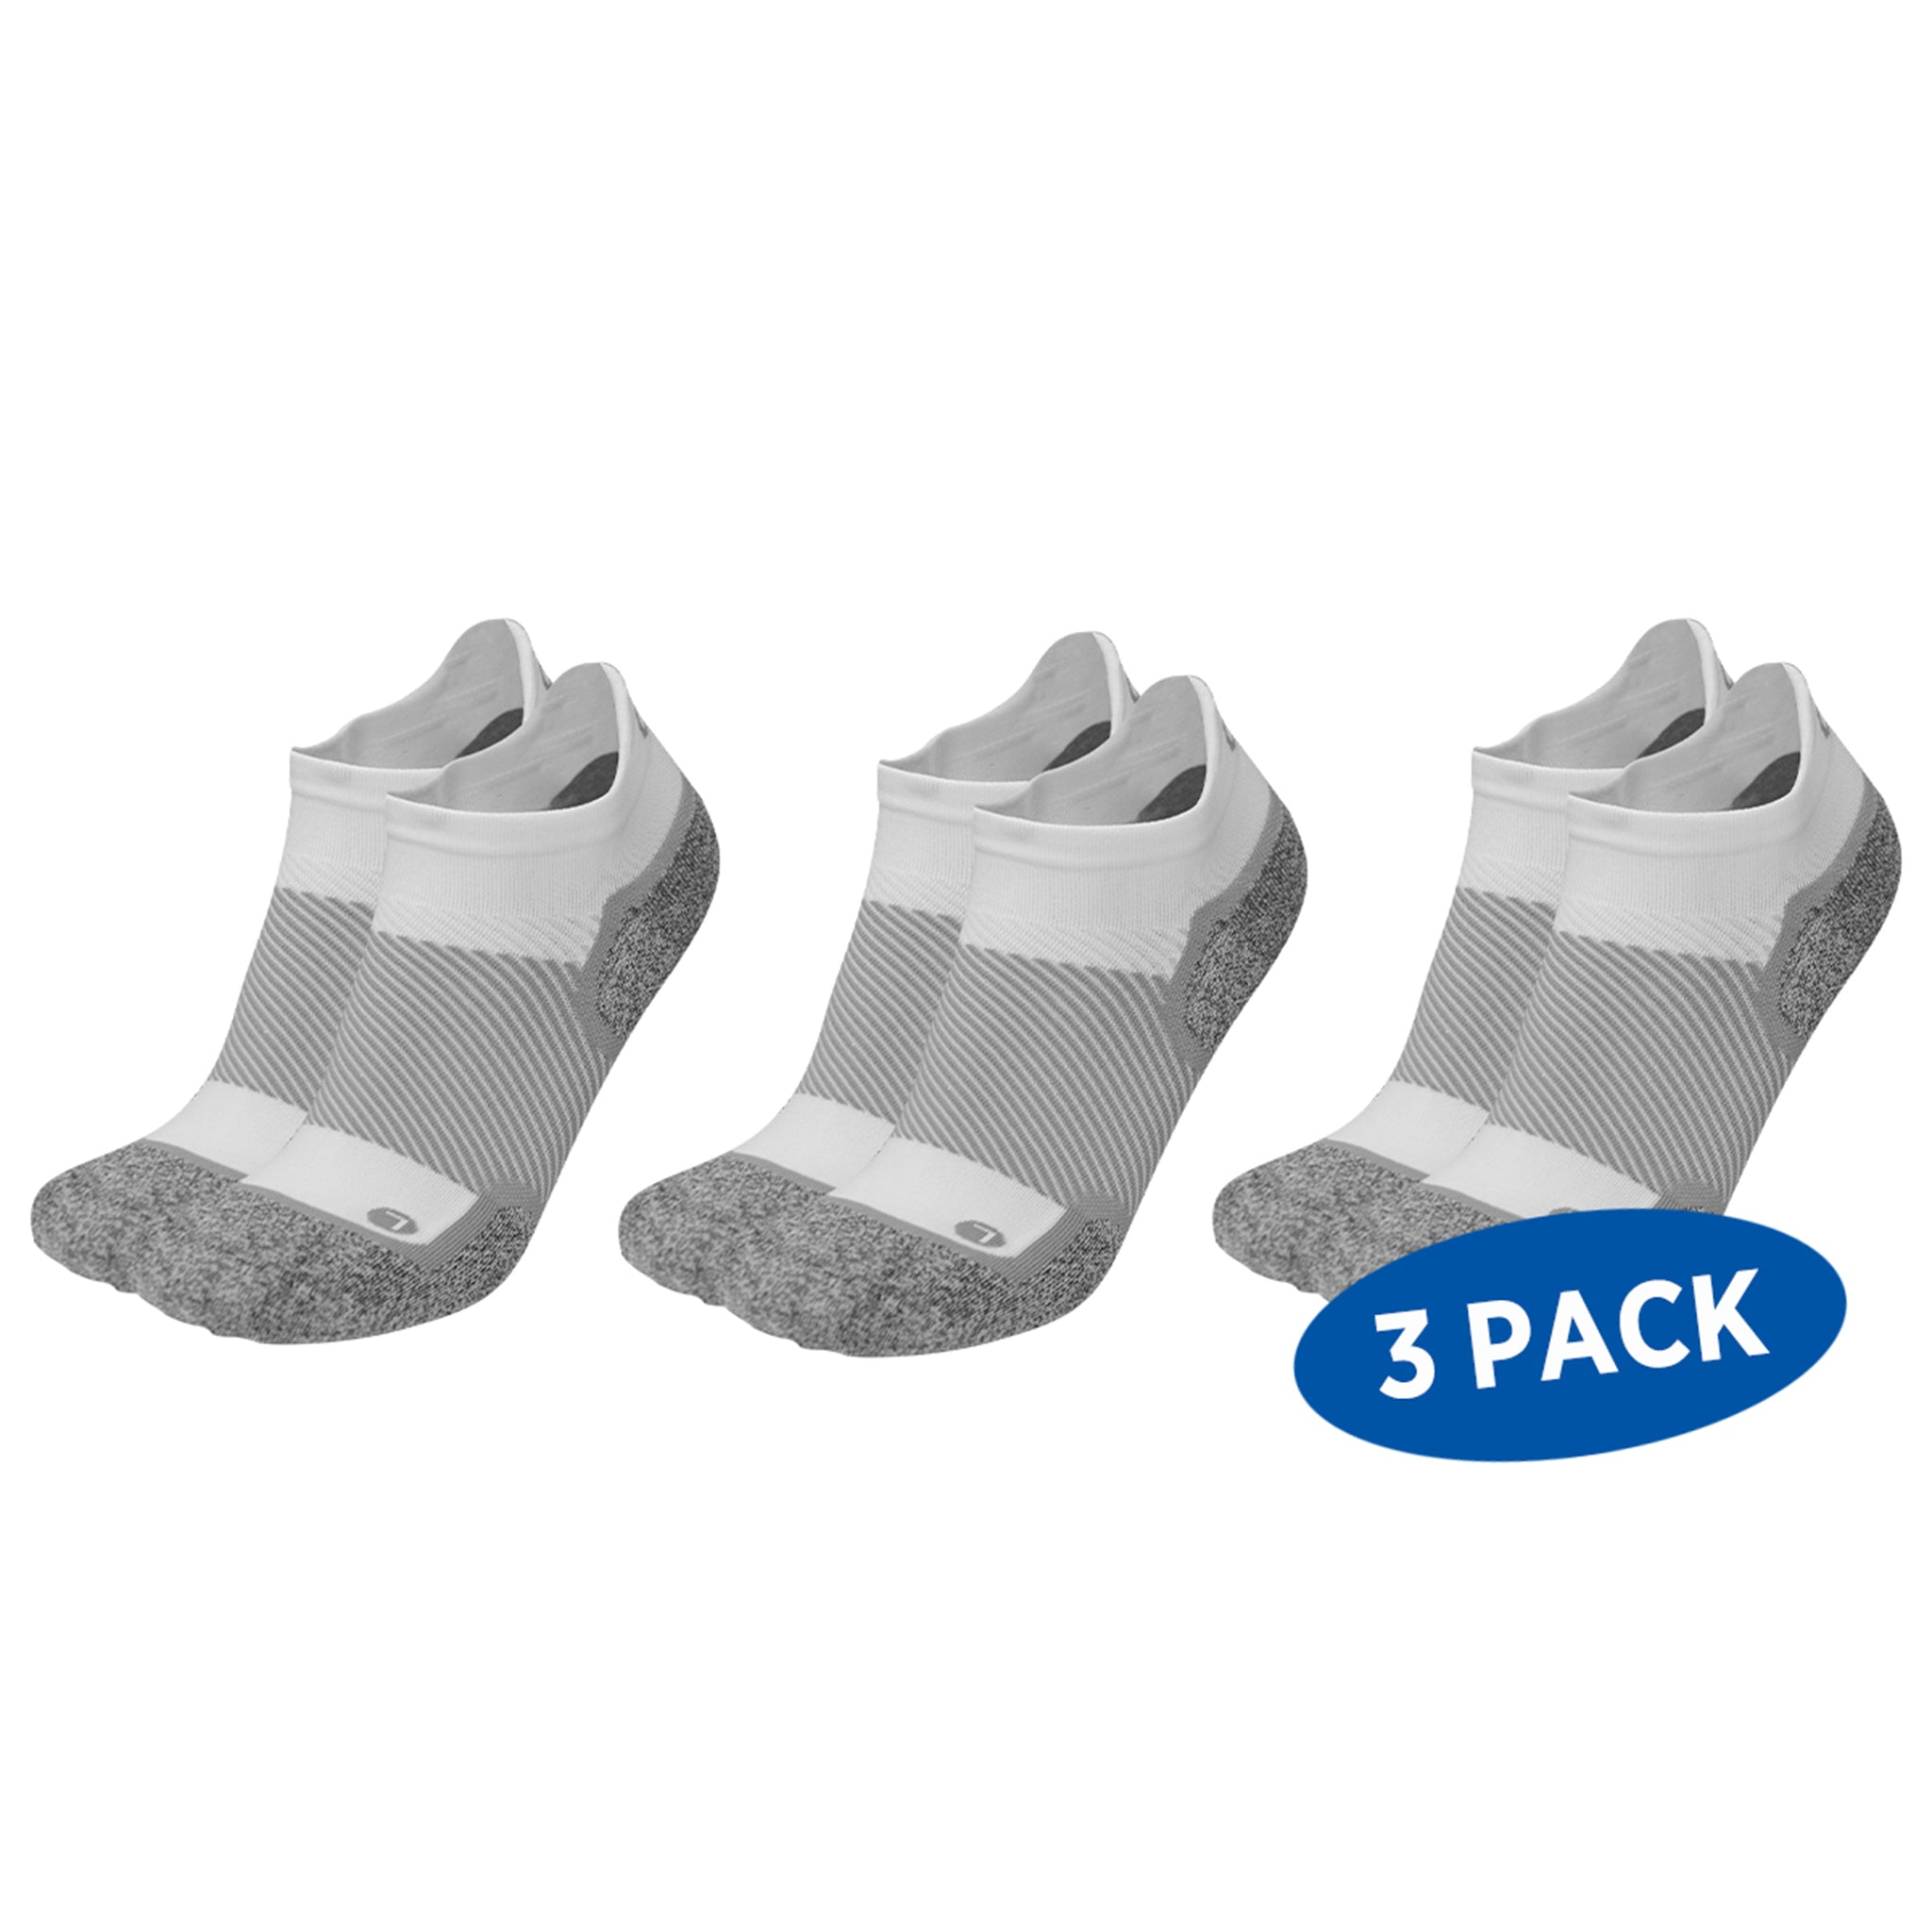 OrthoSleeve WC4 No Show Diabetic Socks, Wellness Socks for Sensitive Feet,  Neuropathy and Poor Circulation, Large Wide, No Show, 3 Pair, Black